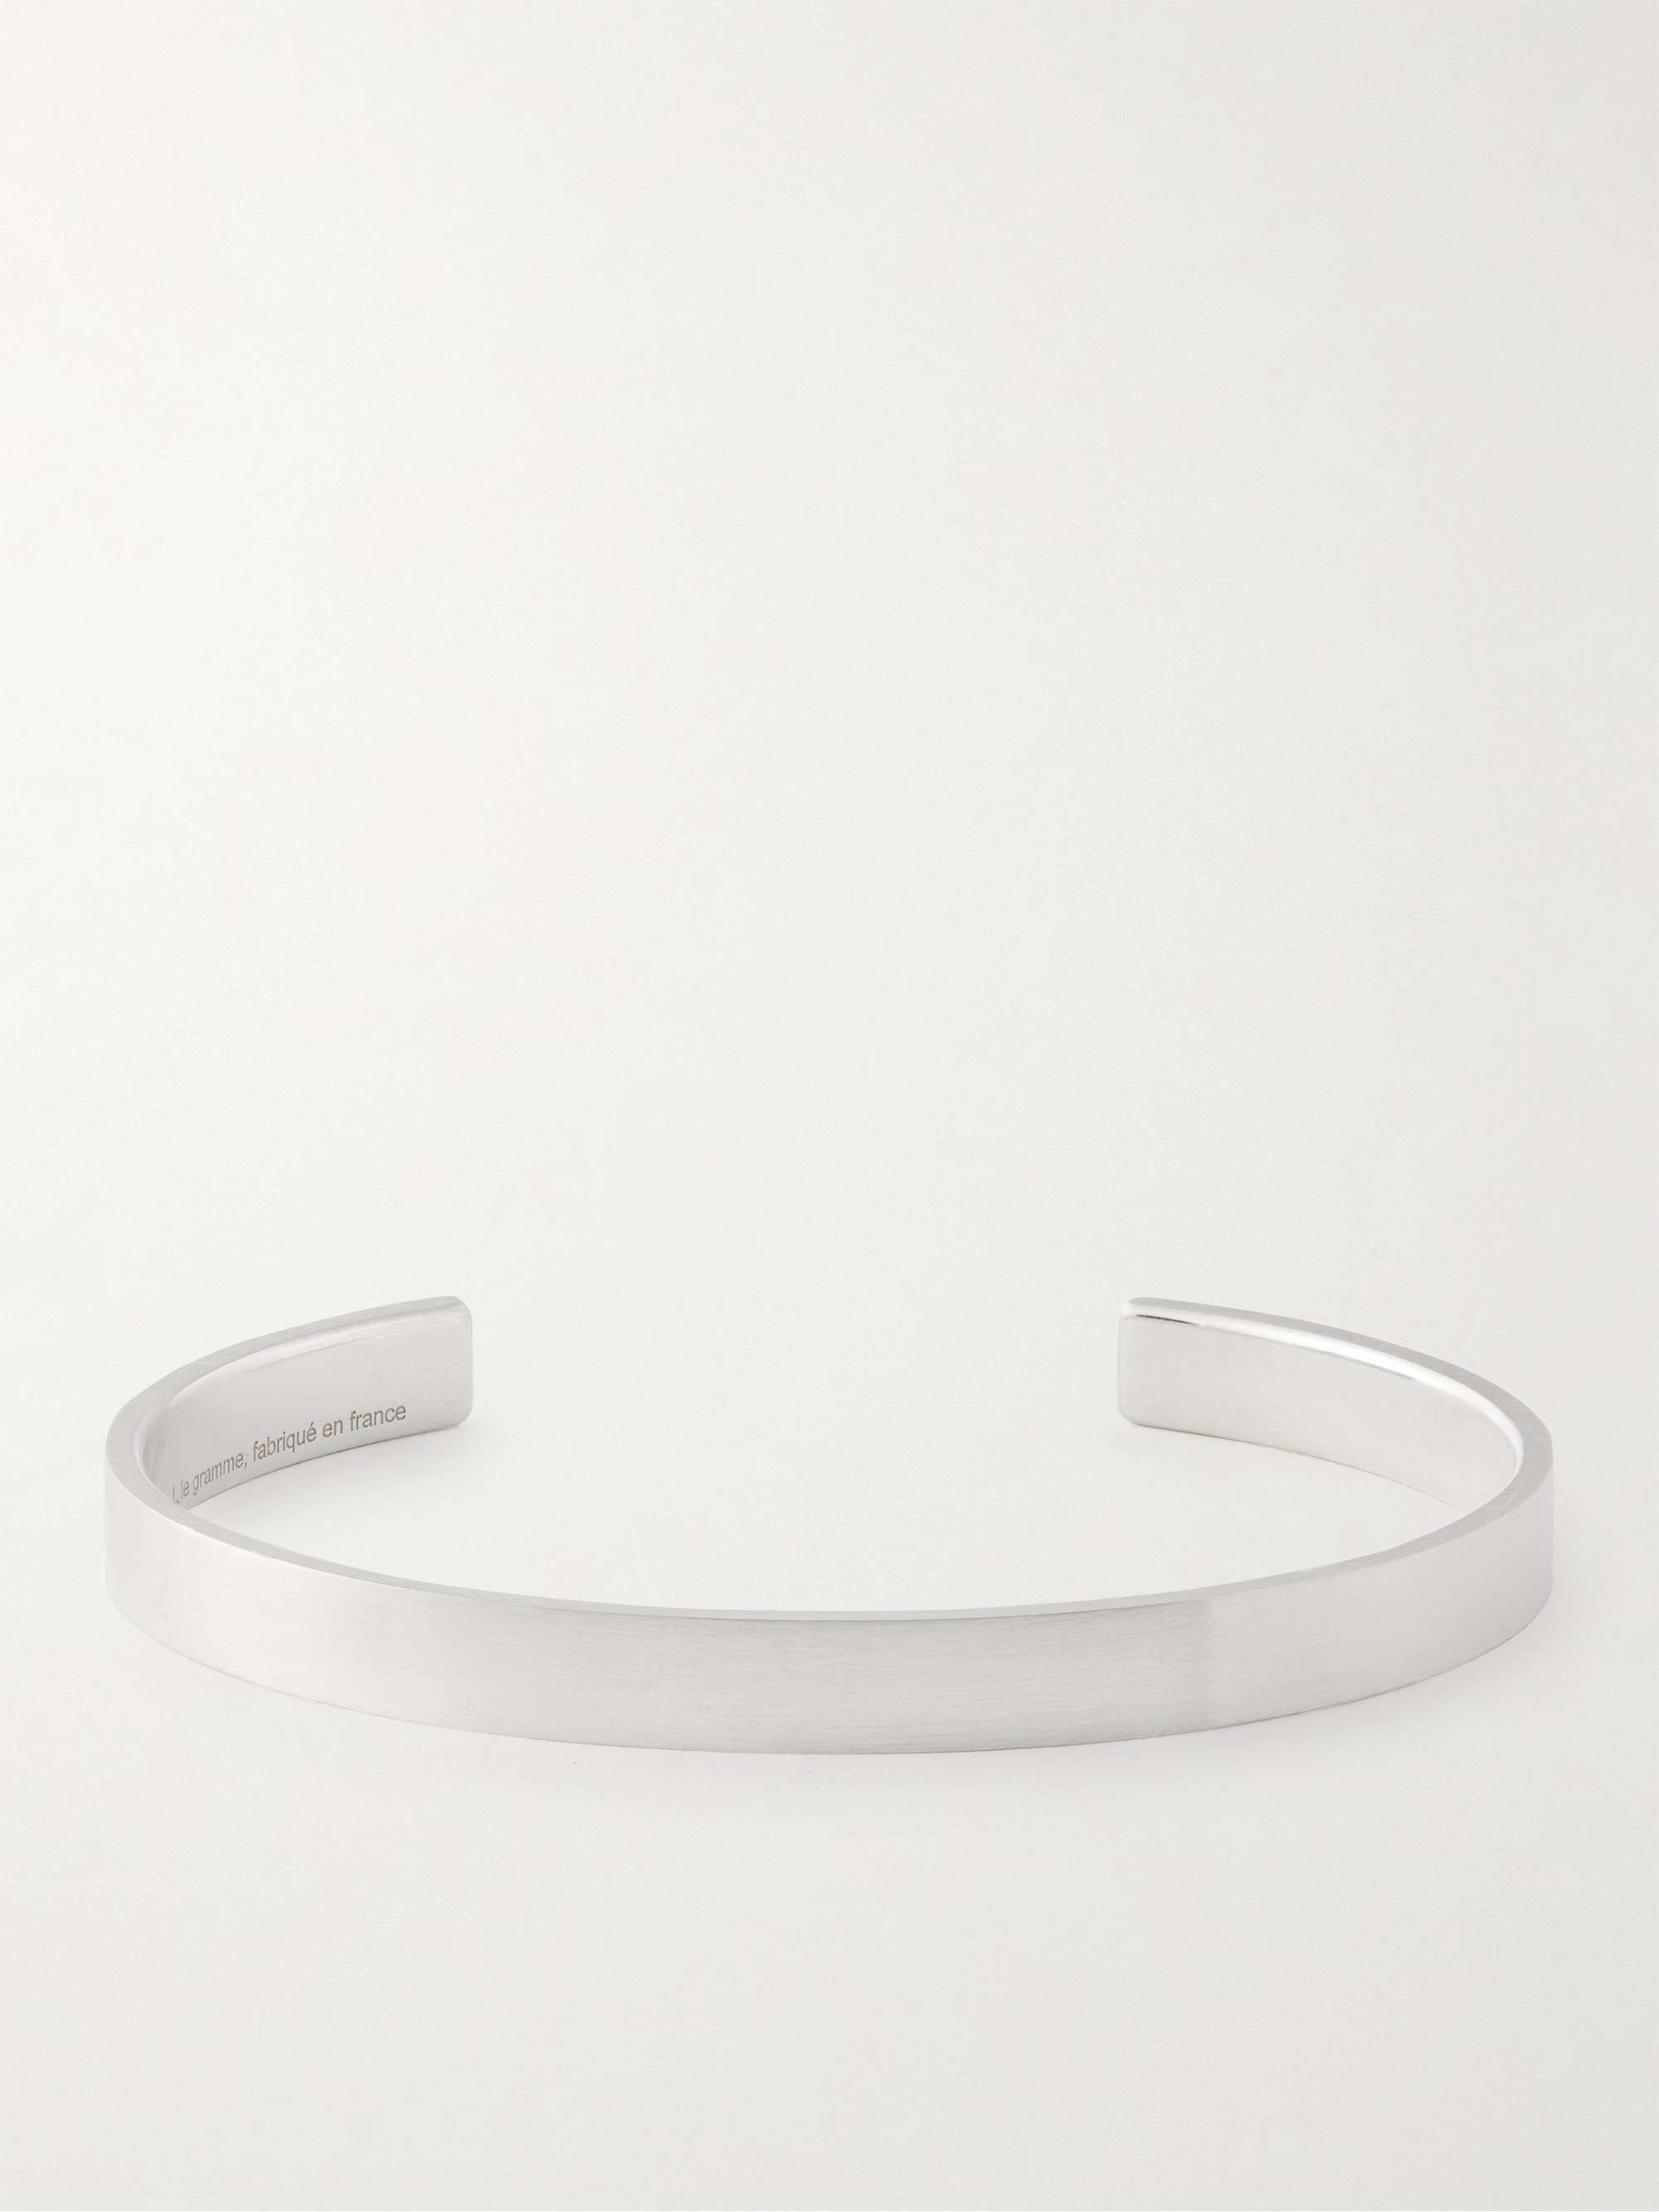 LE GRAMME 21g Brushed Sterling Silver Cuff